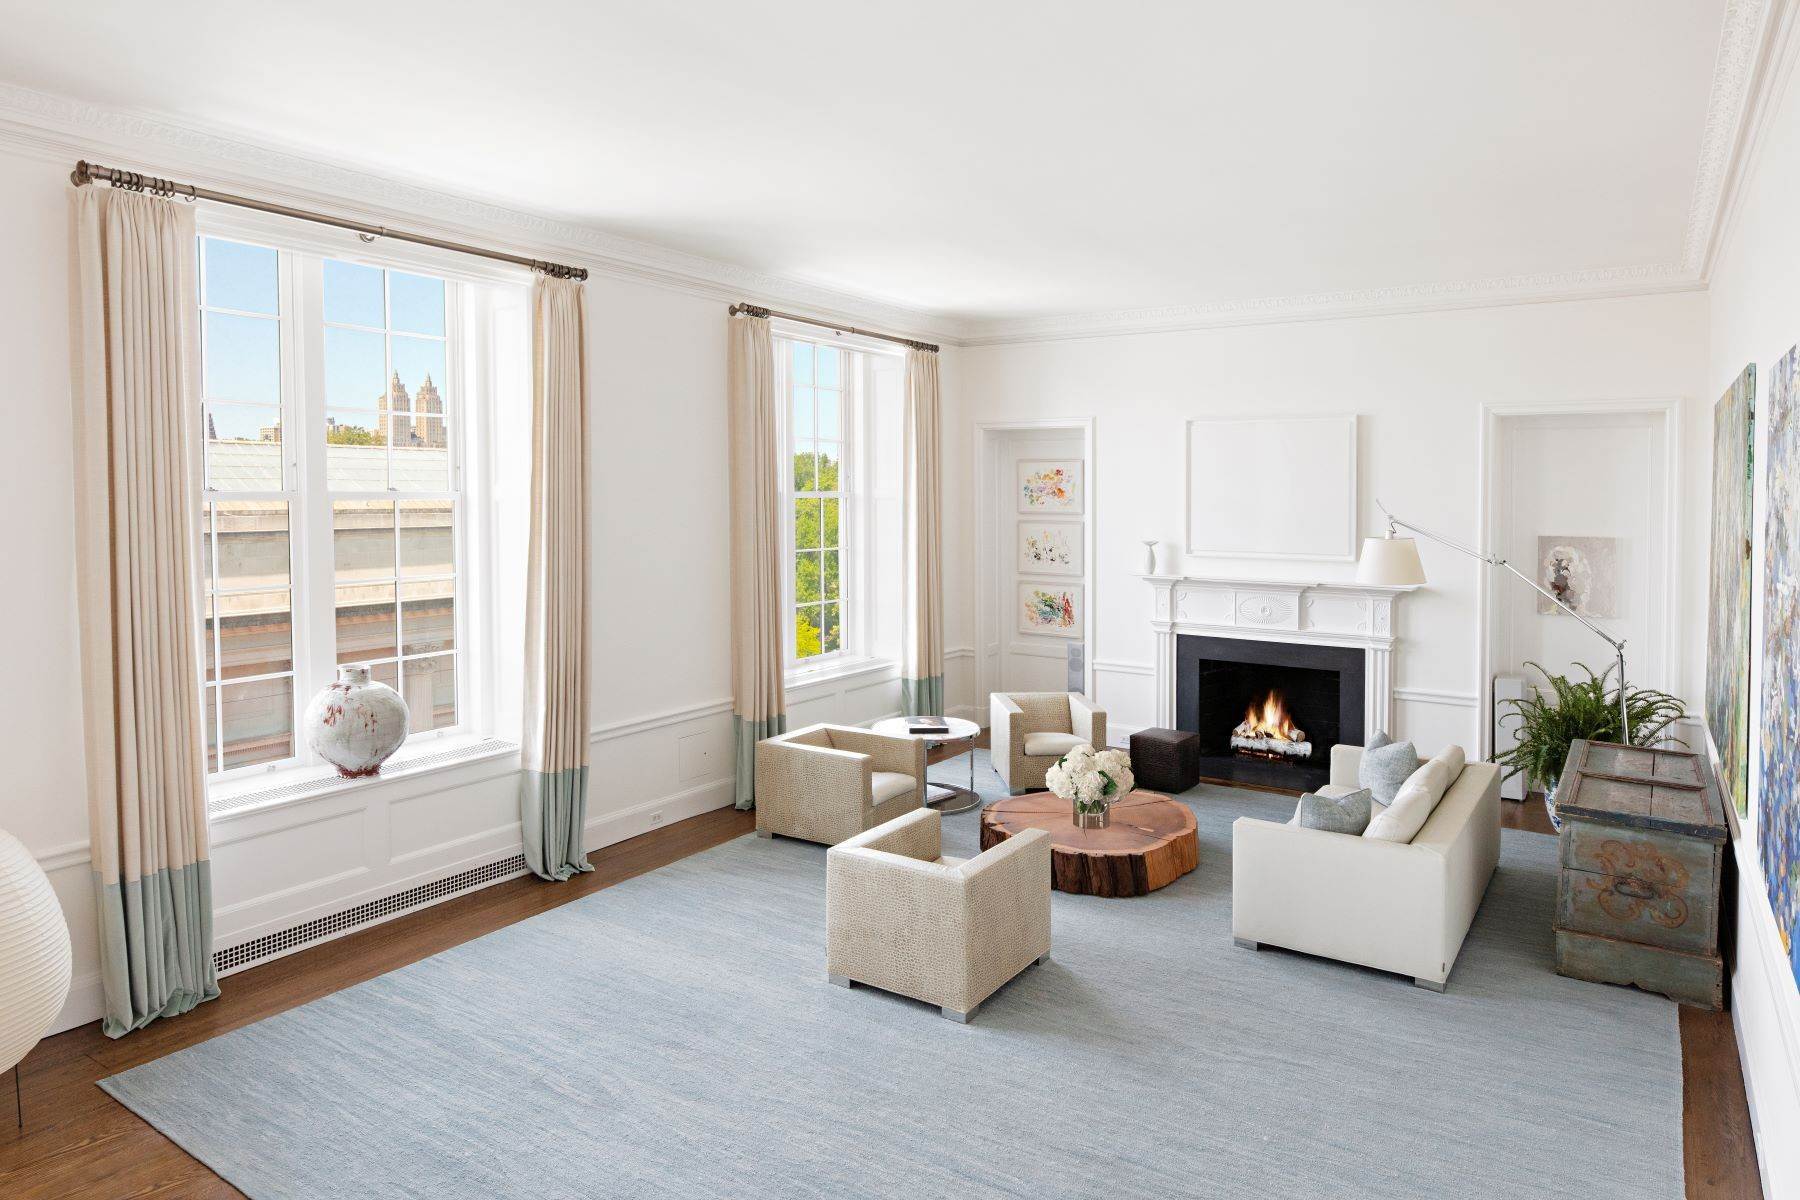 Co-op Properties for Sale at 1020 Fifth Avenue 7th Floor 1020 Fifth Avenue, 7 New York, New York 10028 United States